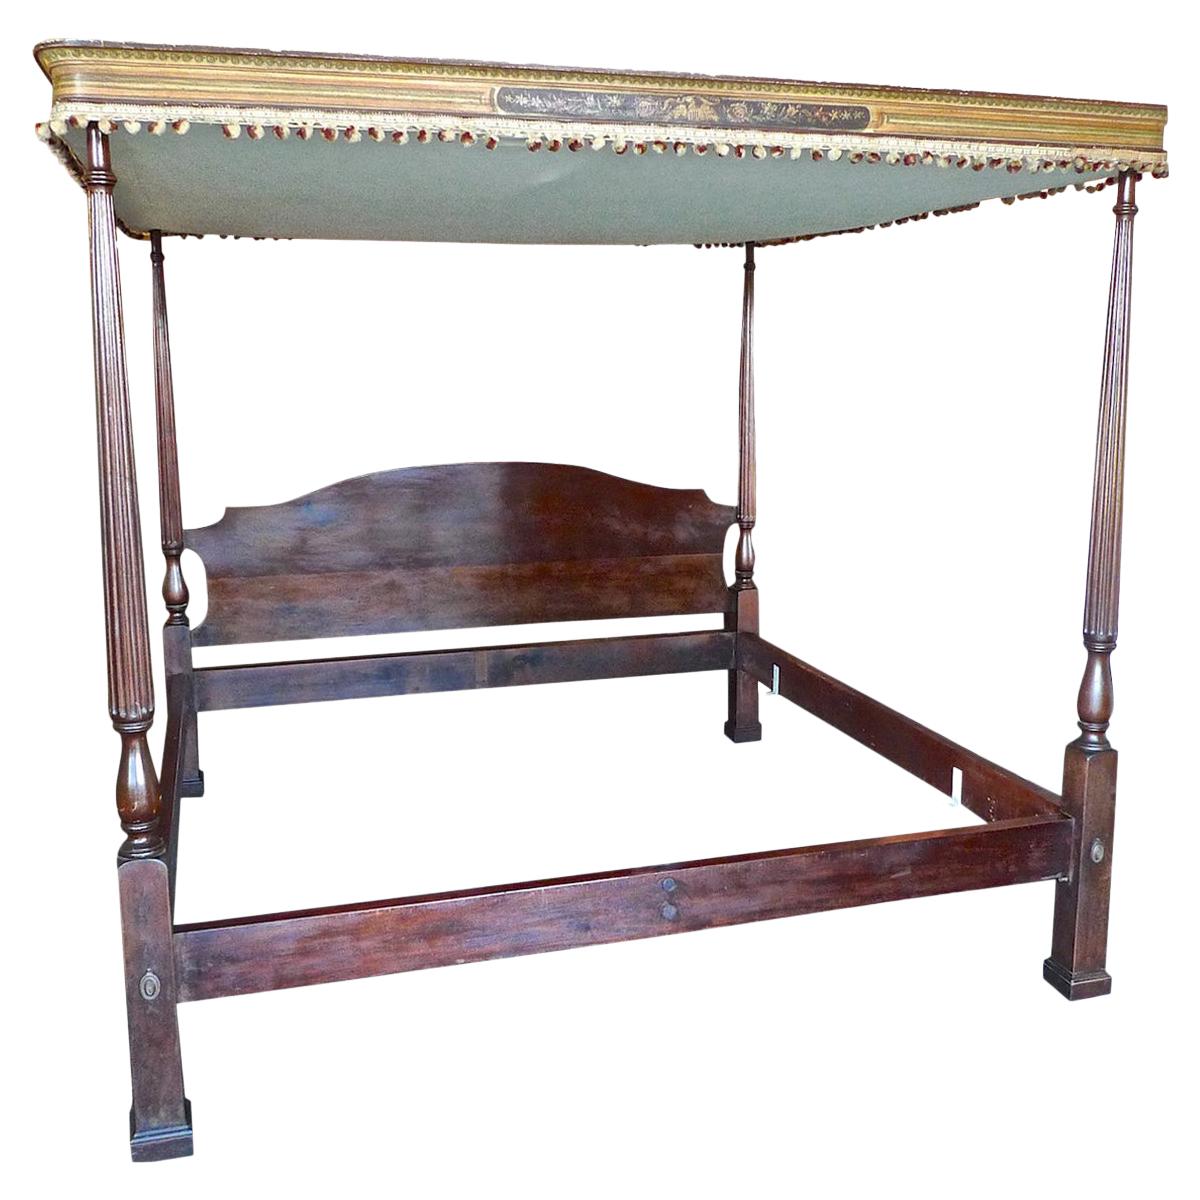 American 1940s Solid Mahogany 4 Poster Bed with Italian Hand Painted Canopy